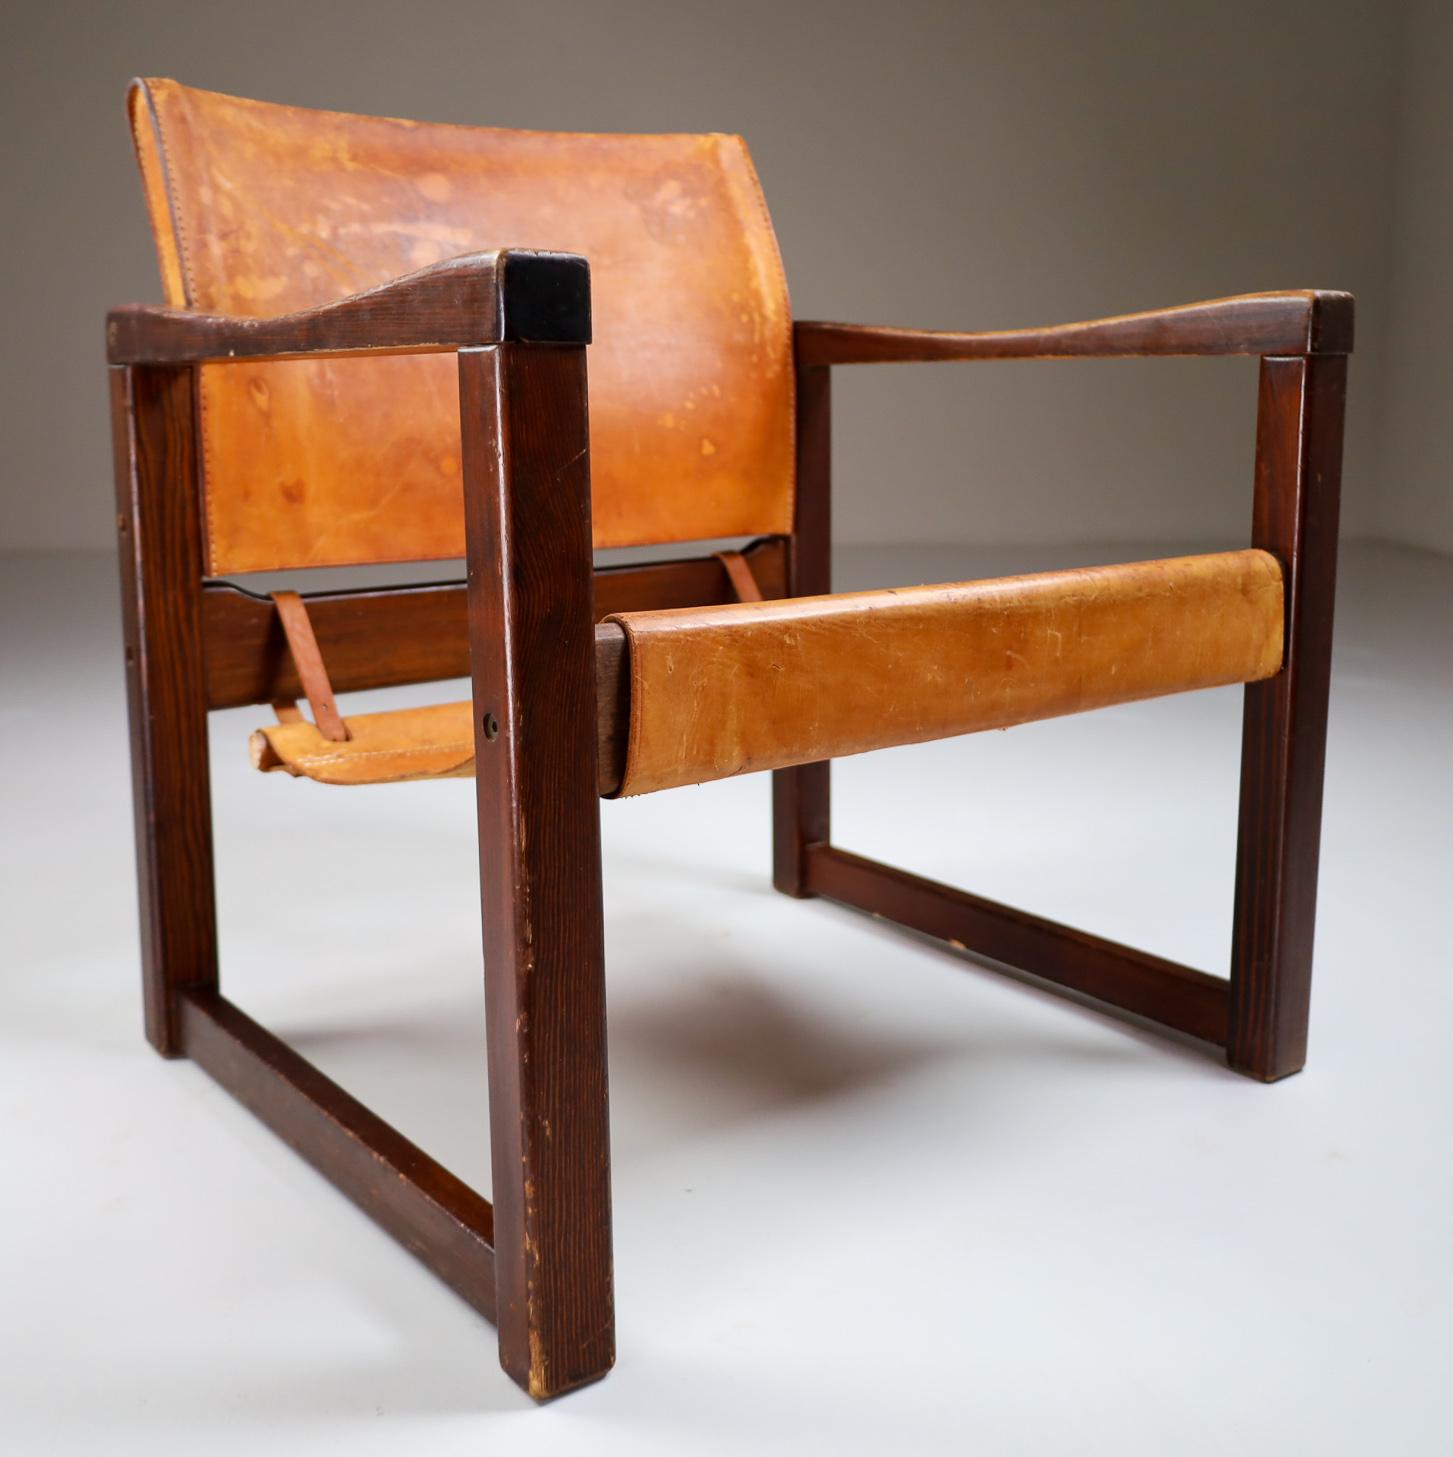 Safari lounge chair in absolutely gorgeous patinated cognac saddle leather and solid pinewood, circa 1970s. The thick saddle leather is beautifully patinated during use and age and shows interesting stitching. European pine wood with thick saddle